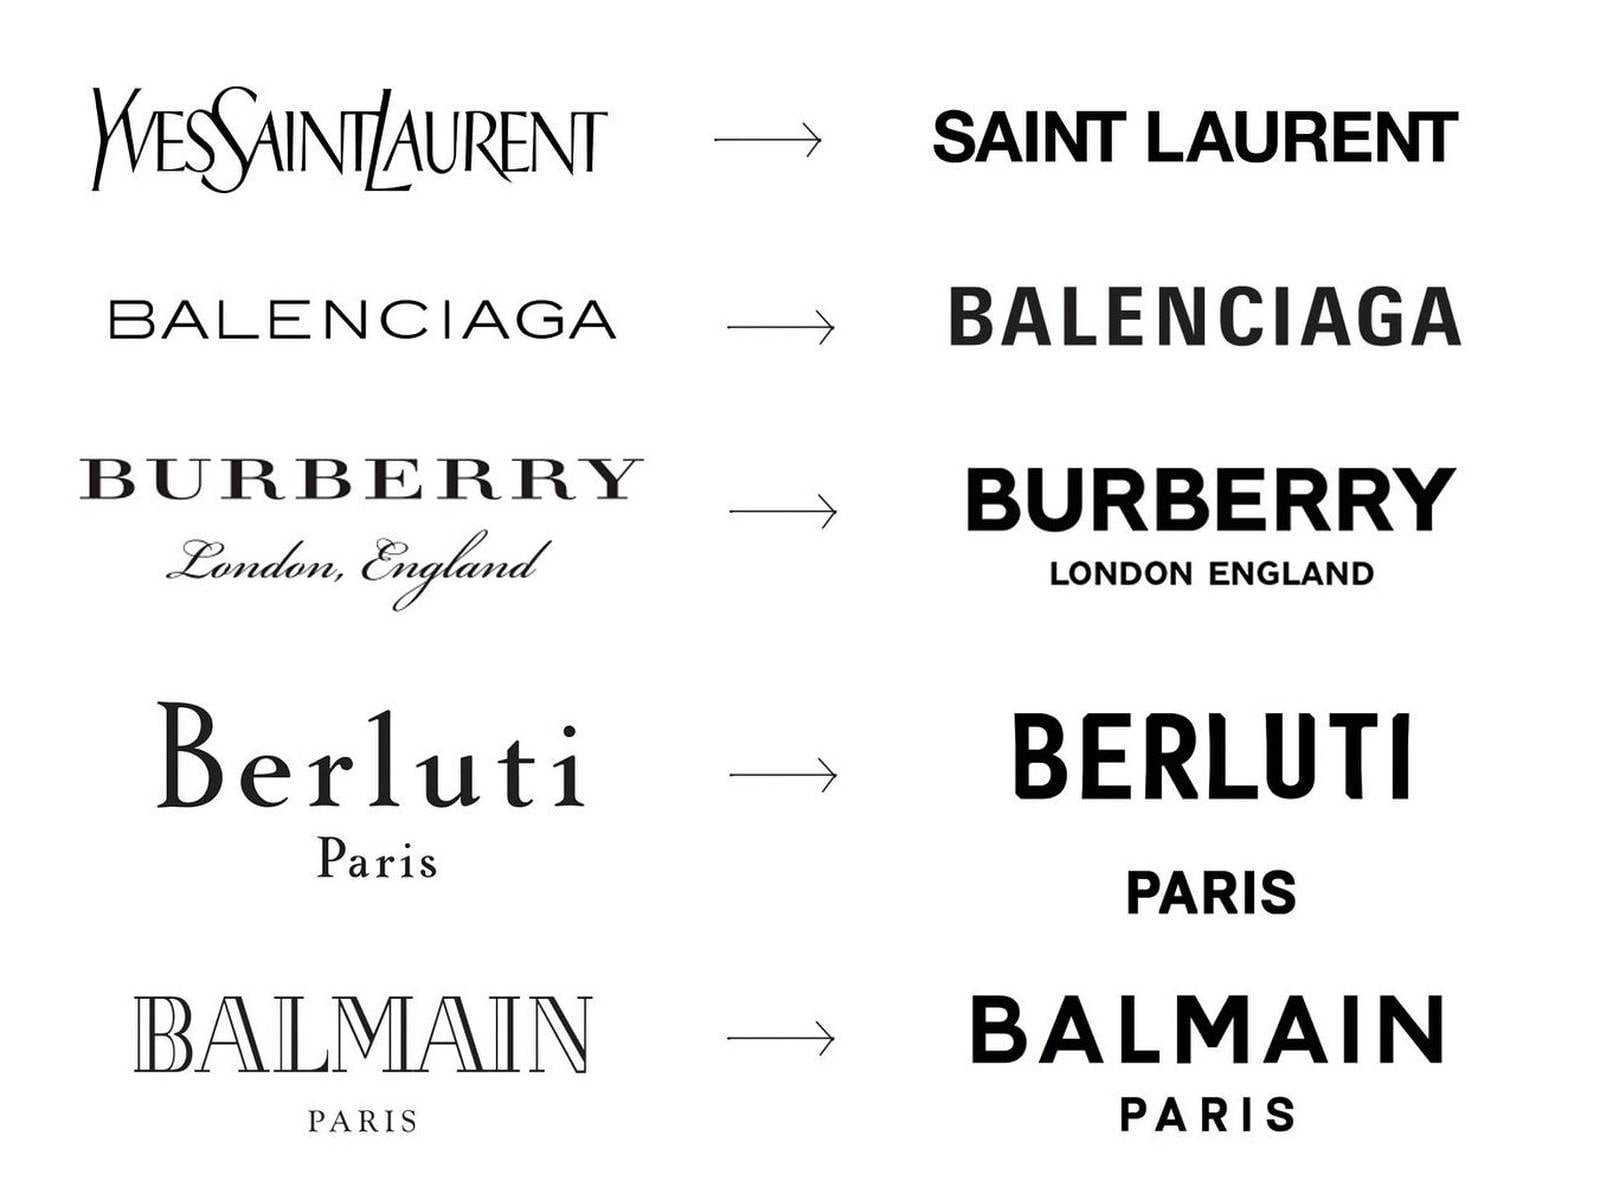 The Louis Vuitton logo: The history behind the logo, meaning, and